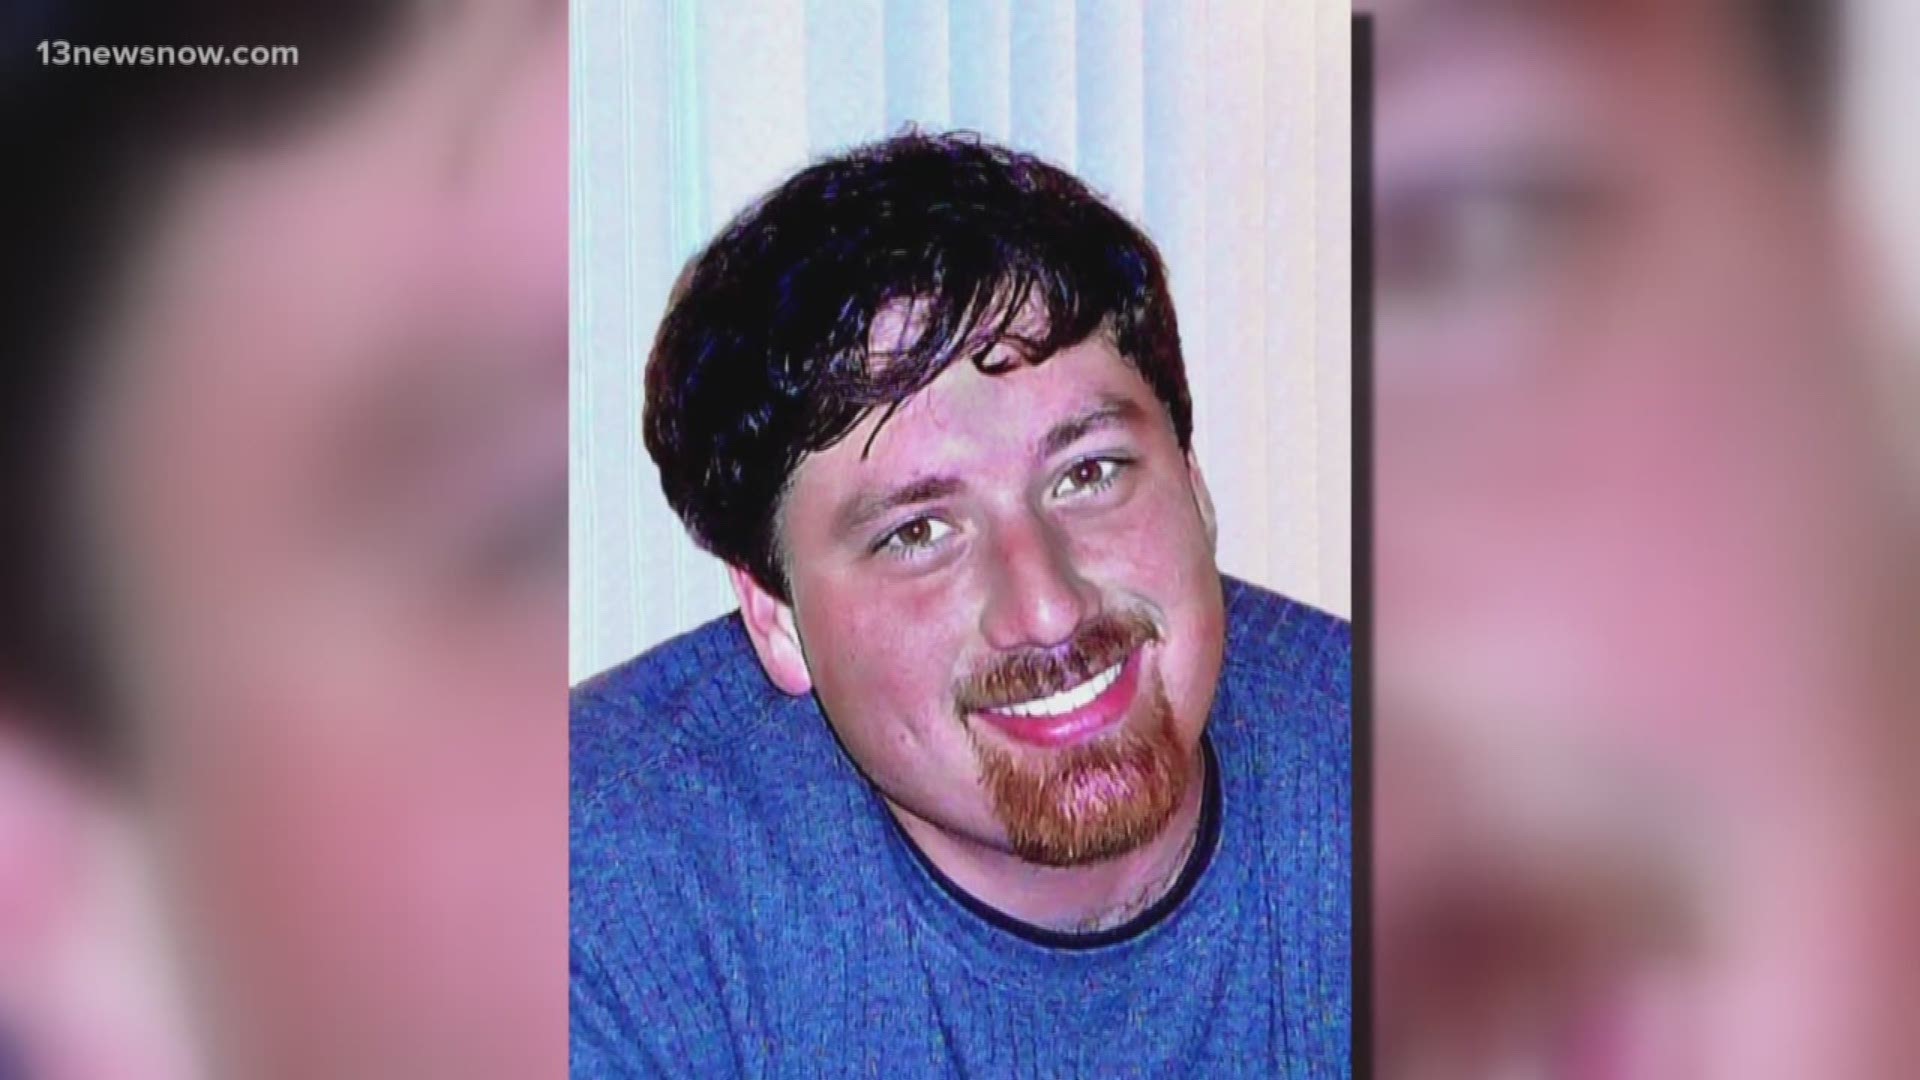 Friends and family of Carl Emmett believe someone is responsible for Emmett's death. Police continue to investigate after they found Emmett's body in his pickup truck.